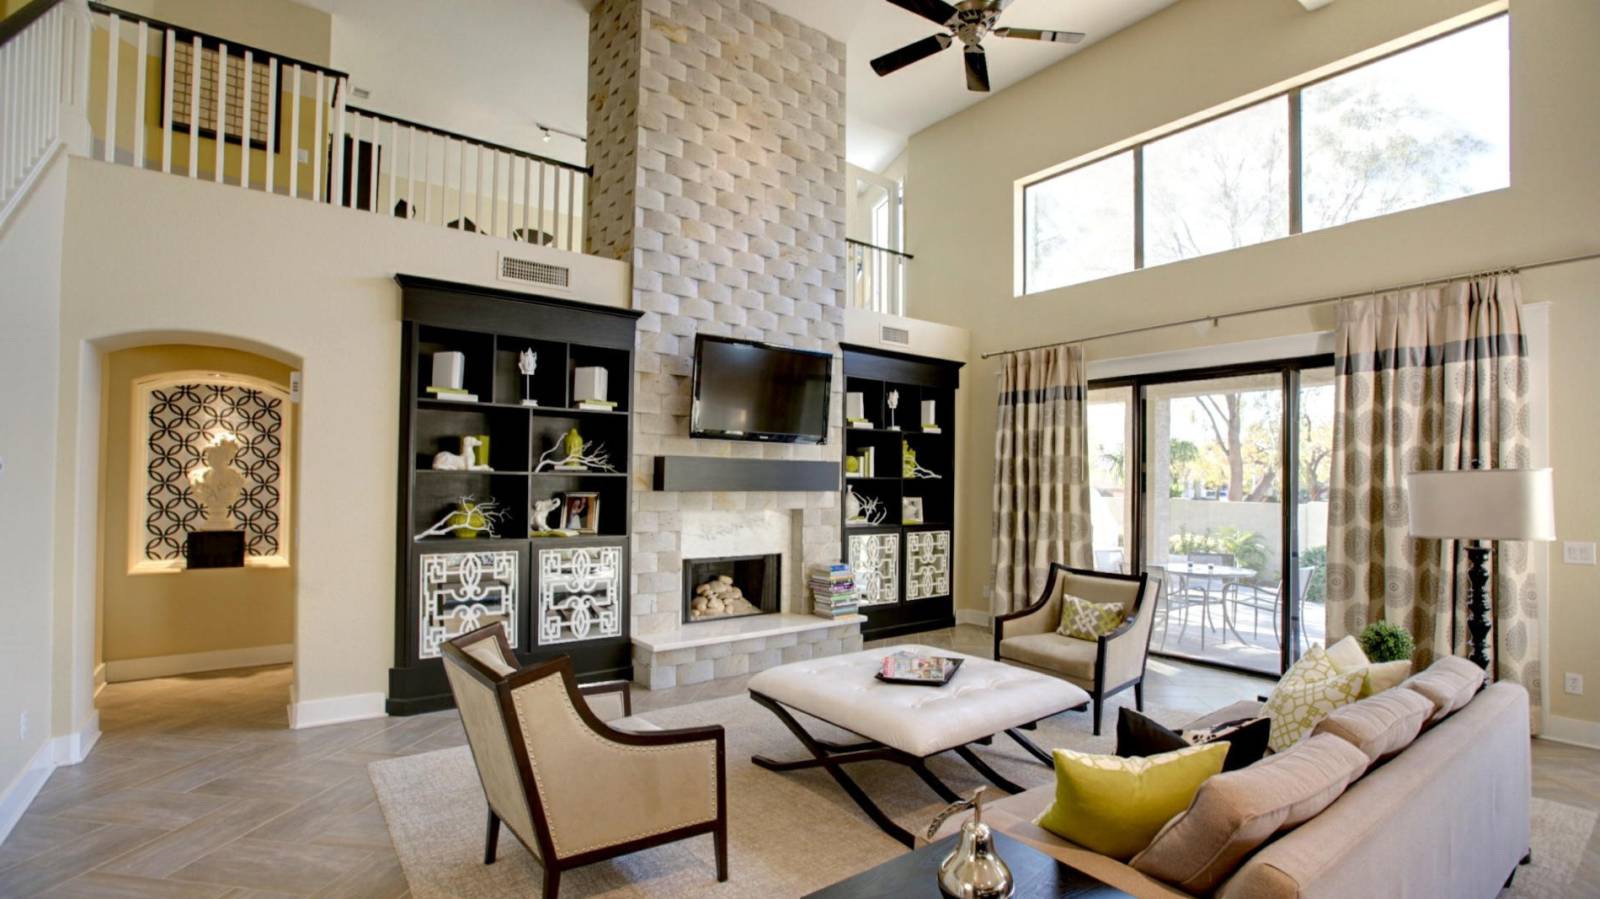 18 Ideas To Design Comfortable Your Family Room